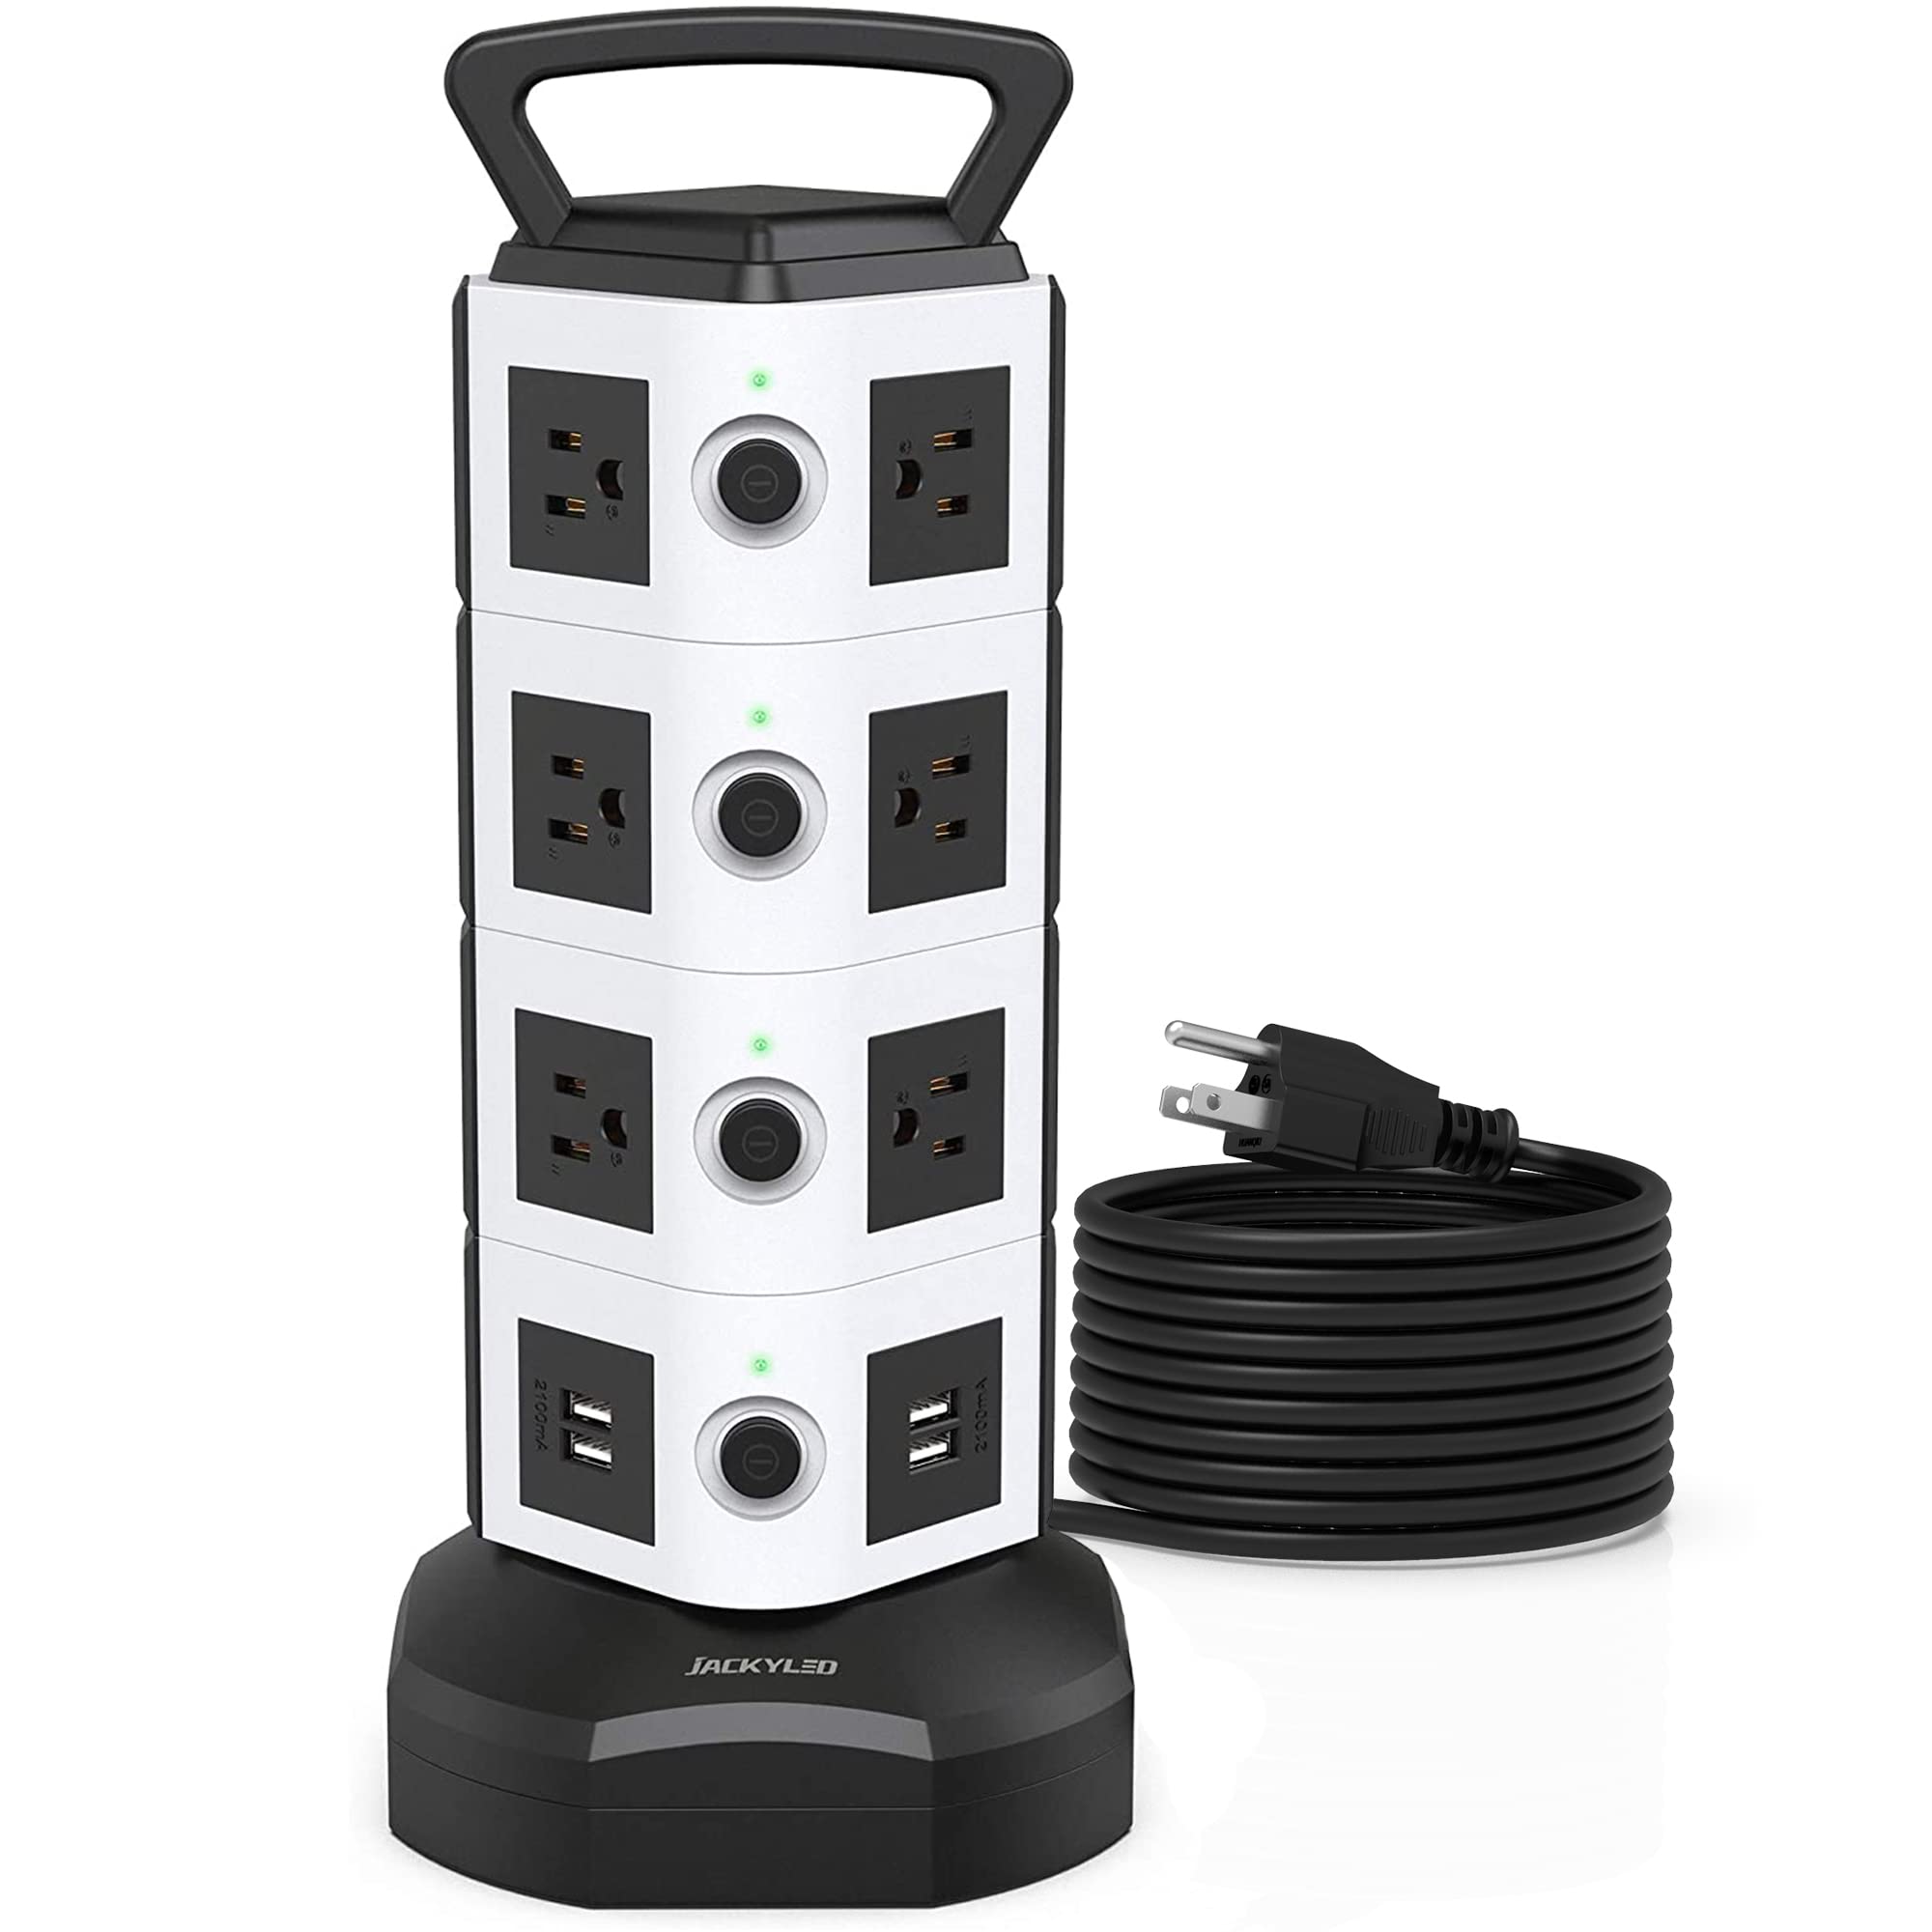 10ft Power Strip Tower JACKYLED Surge Protector Electric Charging Station with 13A 14 AC 4 USB Ports Heavy Duty Extension Cord for Home Office Comp...